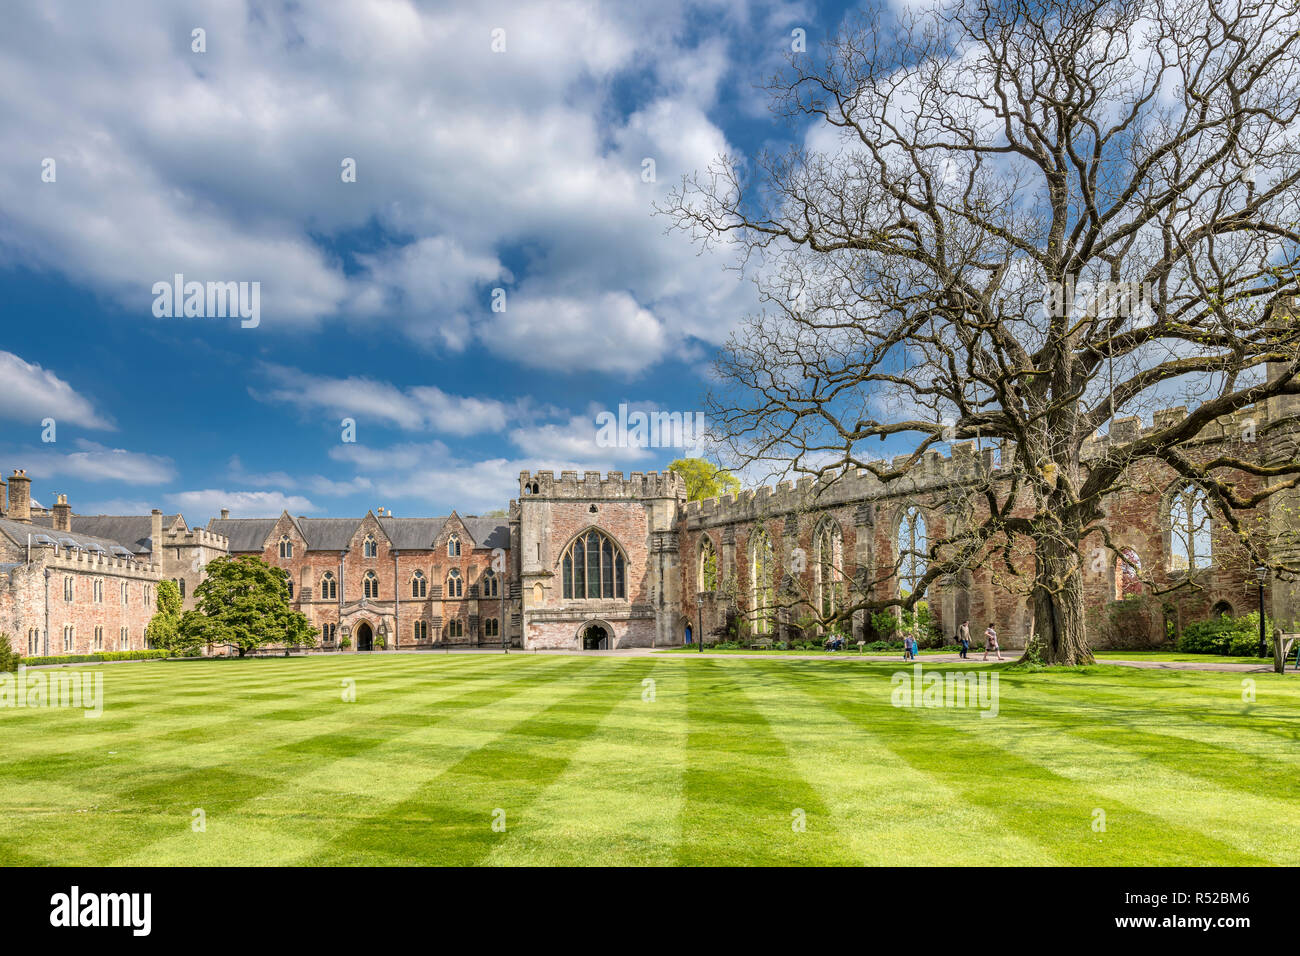 The Bishop's Palace in Wells, Somerset, with its manicured lawn and gardens is a popular tourist destination. Stock Photo